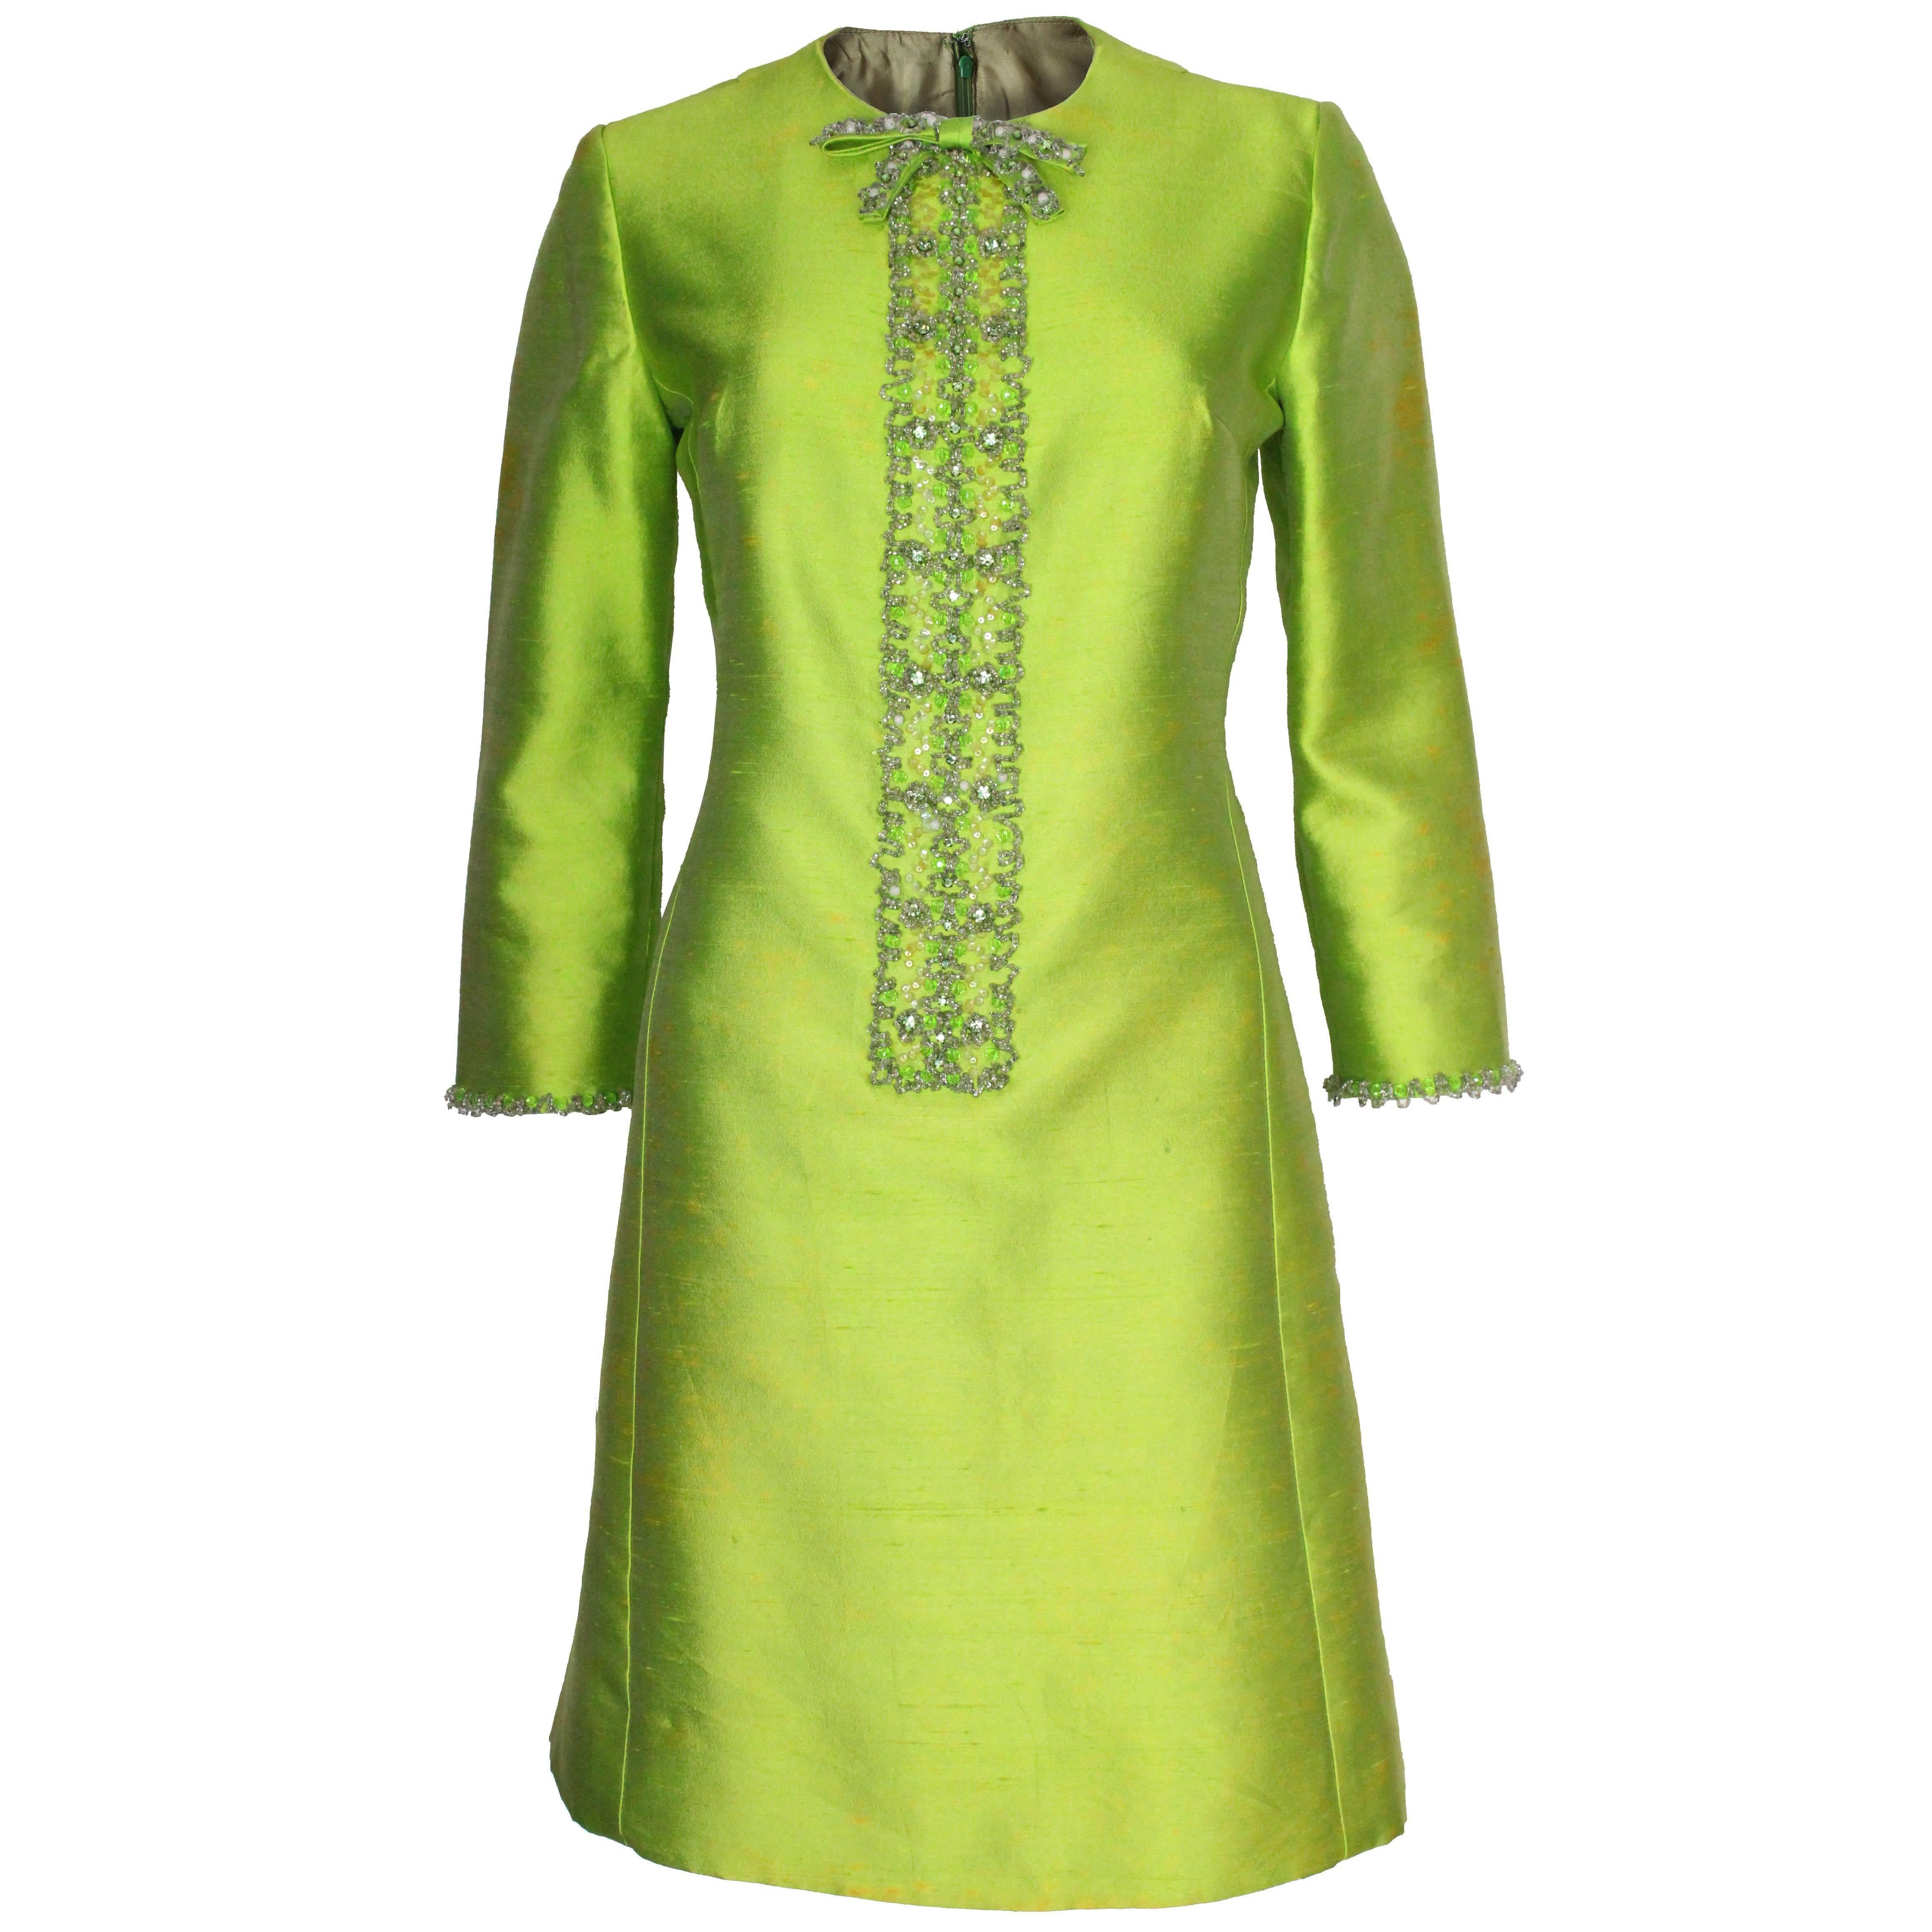 1960s Bright Green Embellished Silk Cocktail Dress